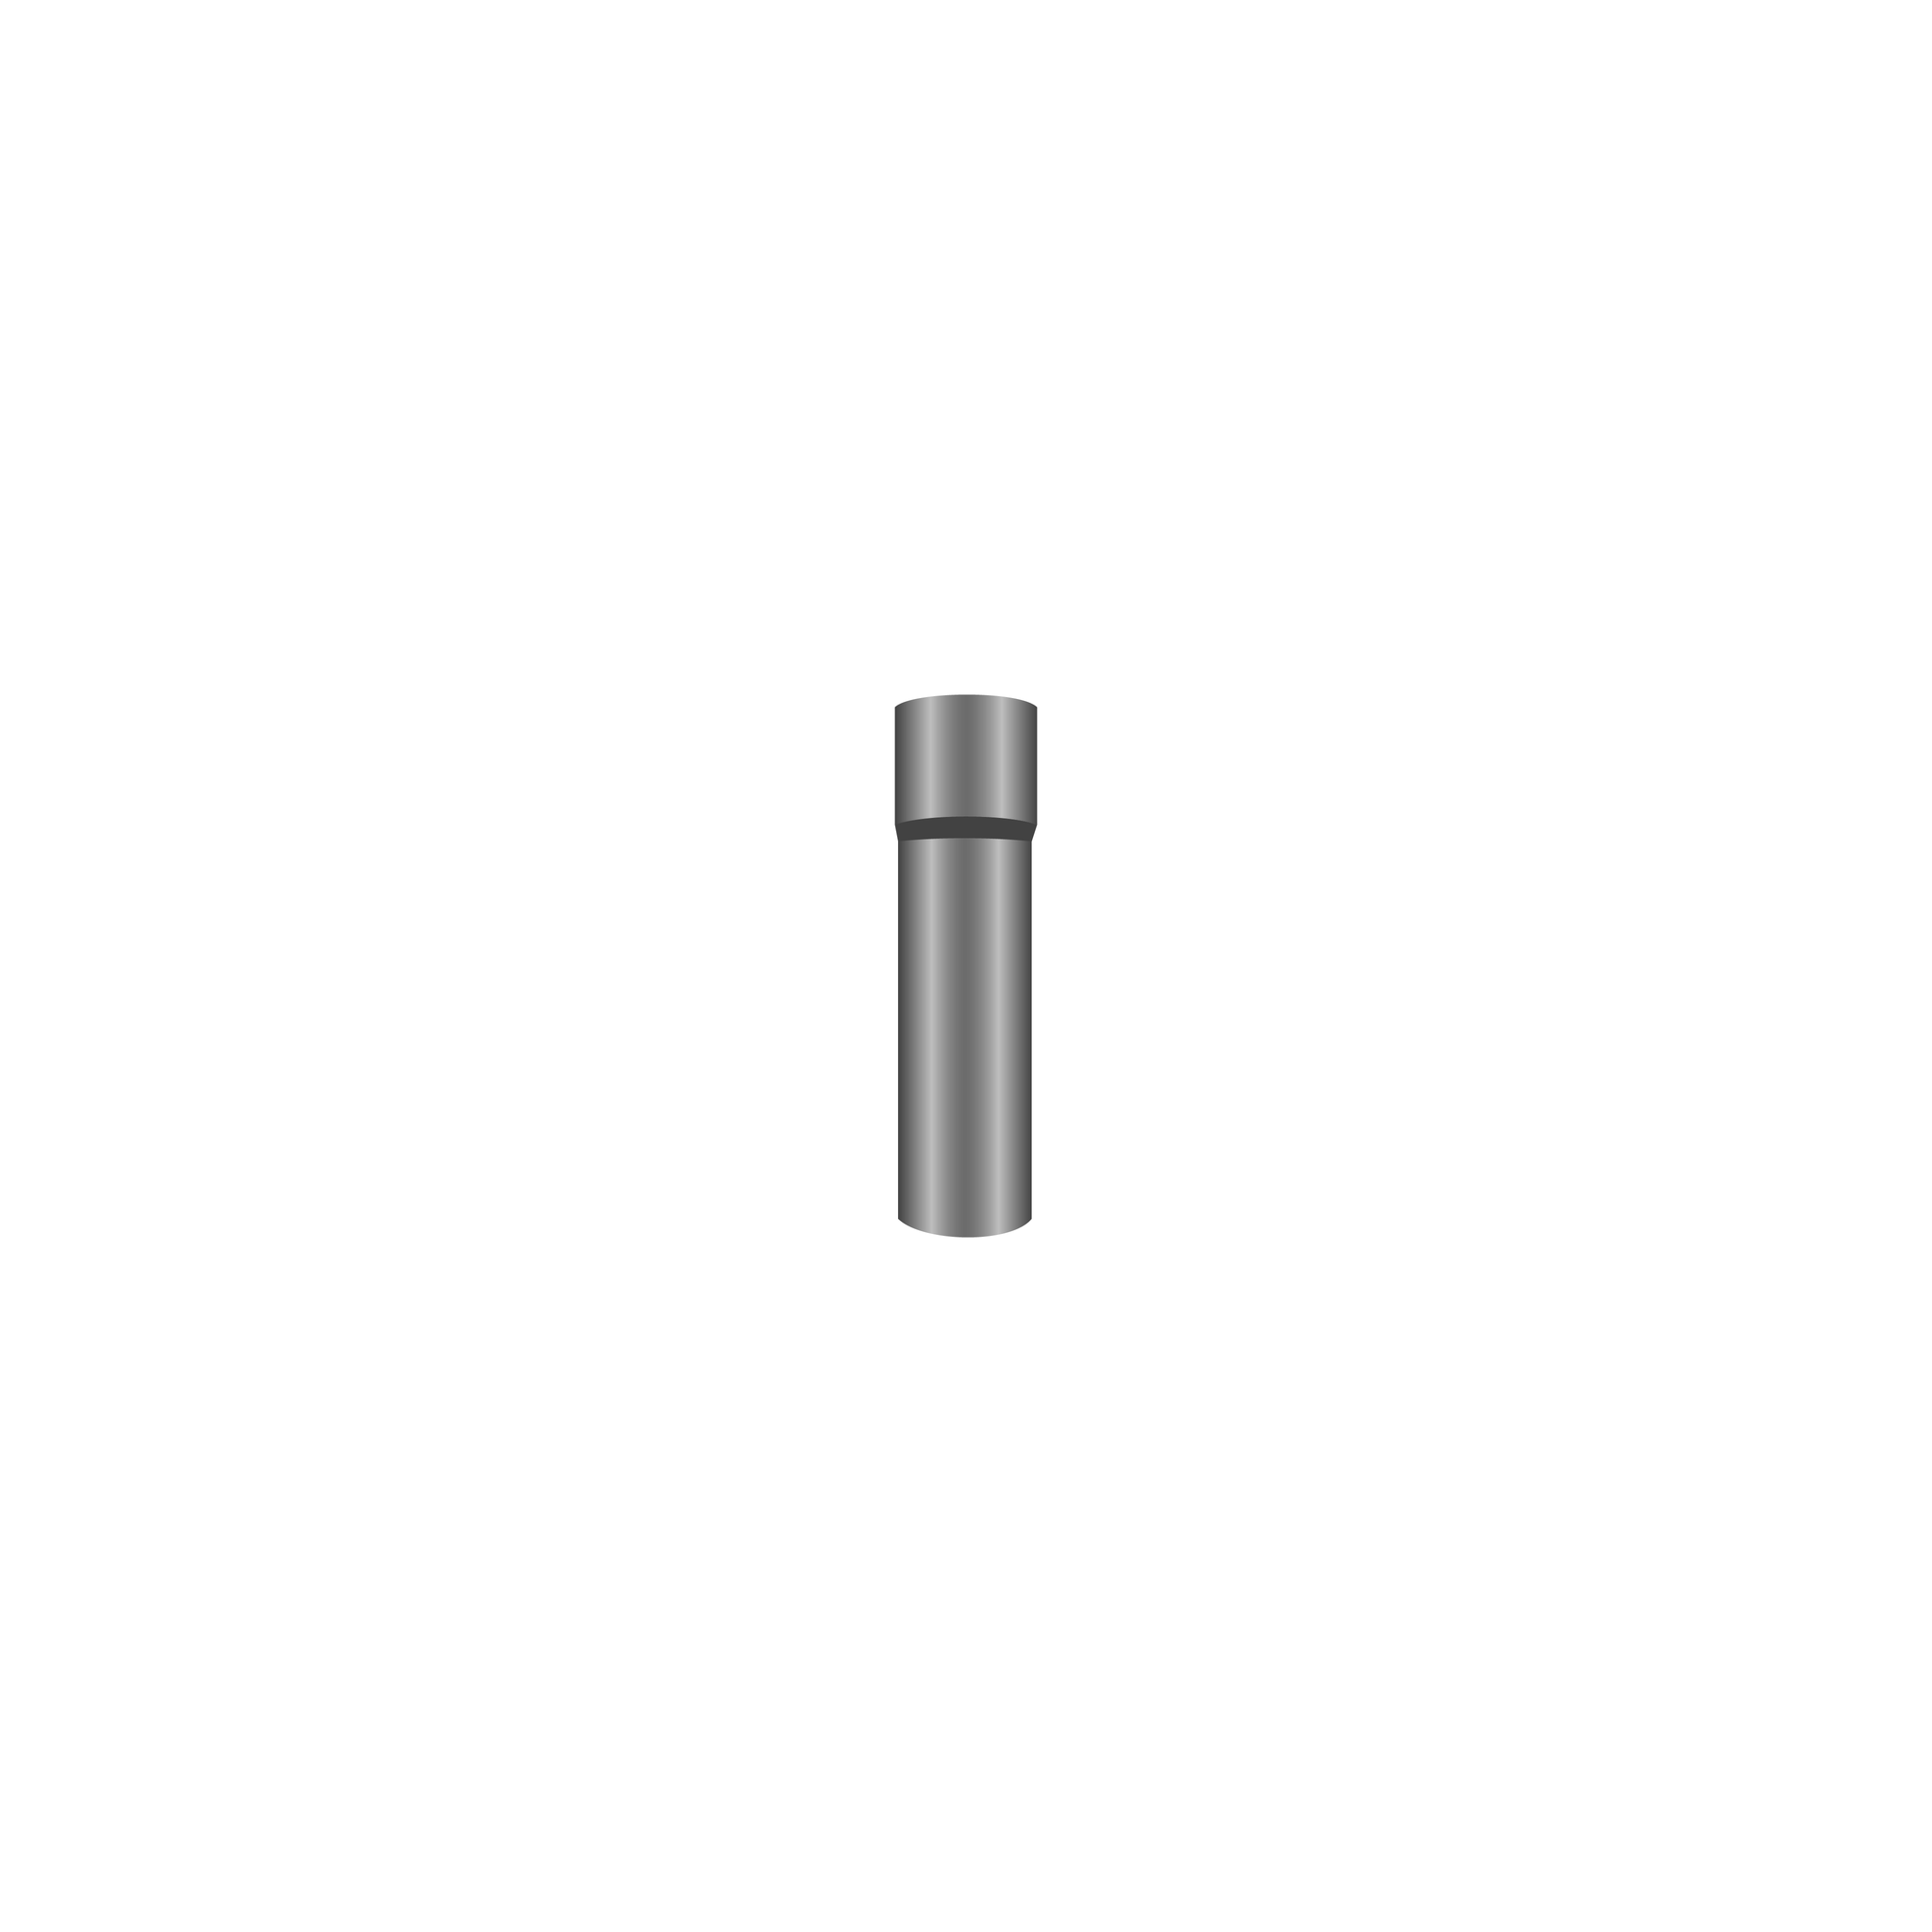 A hollow metal cylinder with a lip that takes up a quarter of the top edge.